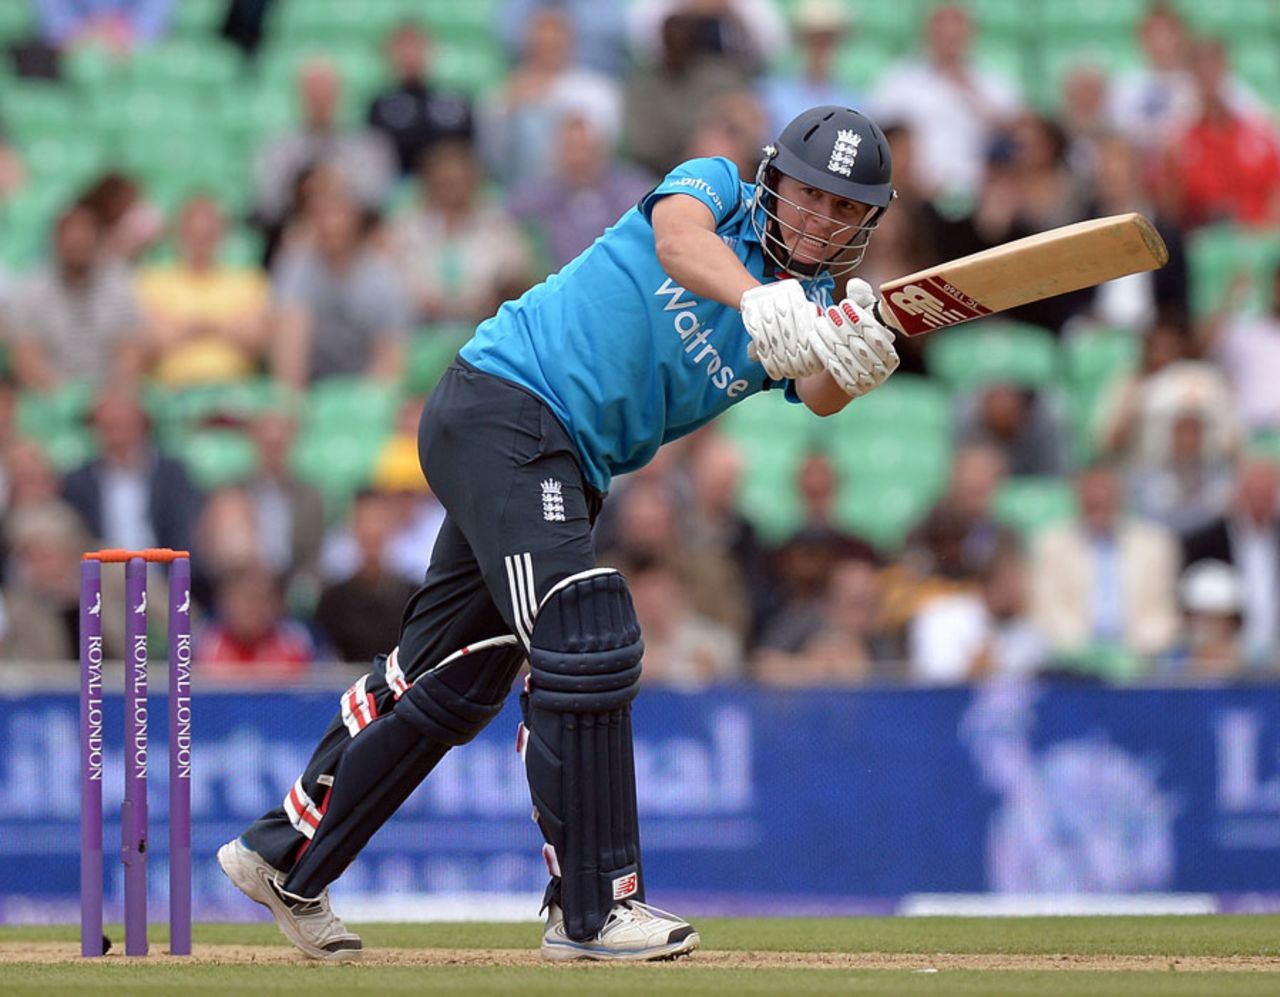 Gary Ballance found the boundary early in his innings, England v Sri Lanka, 1st ODI, The Oval, May 22, 2014